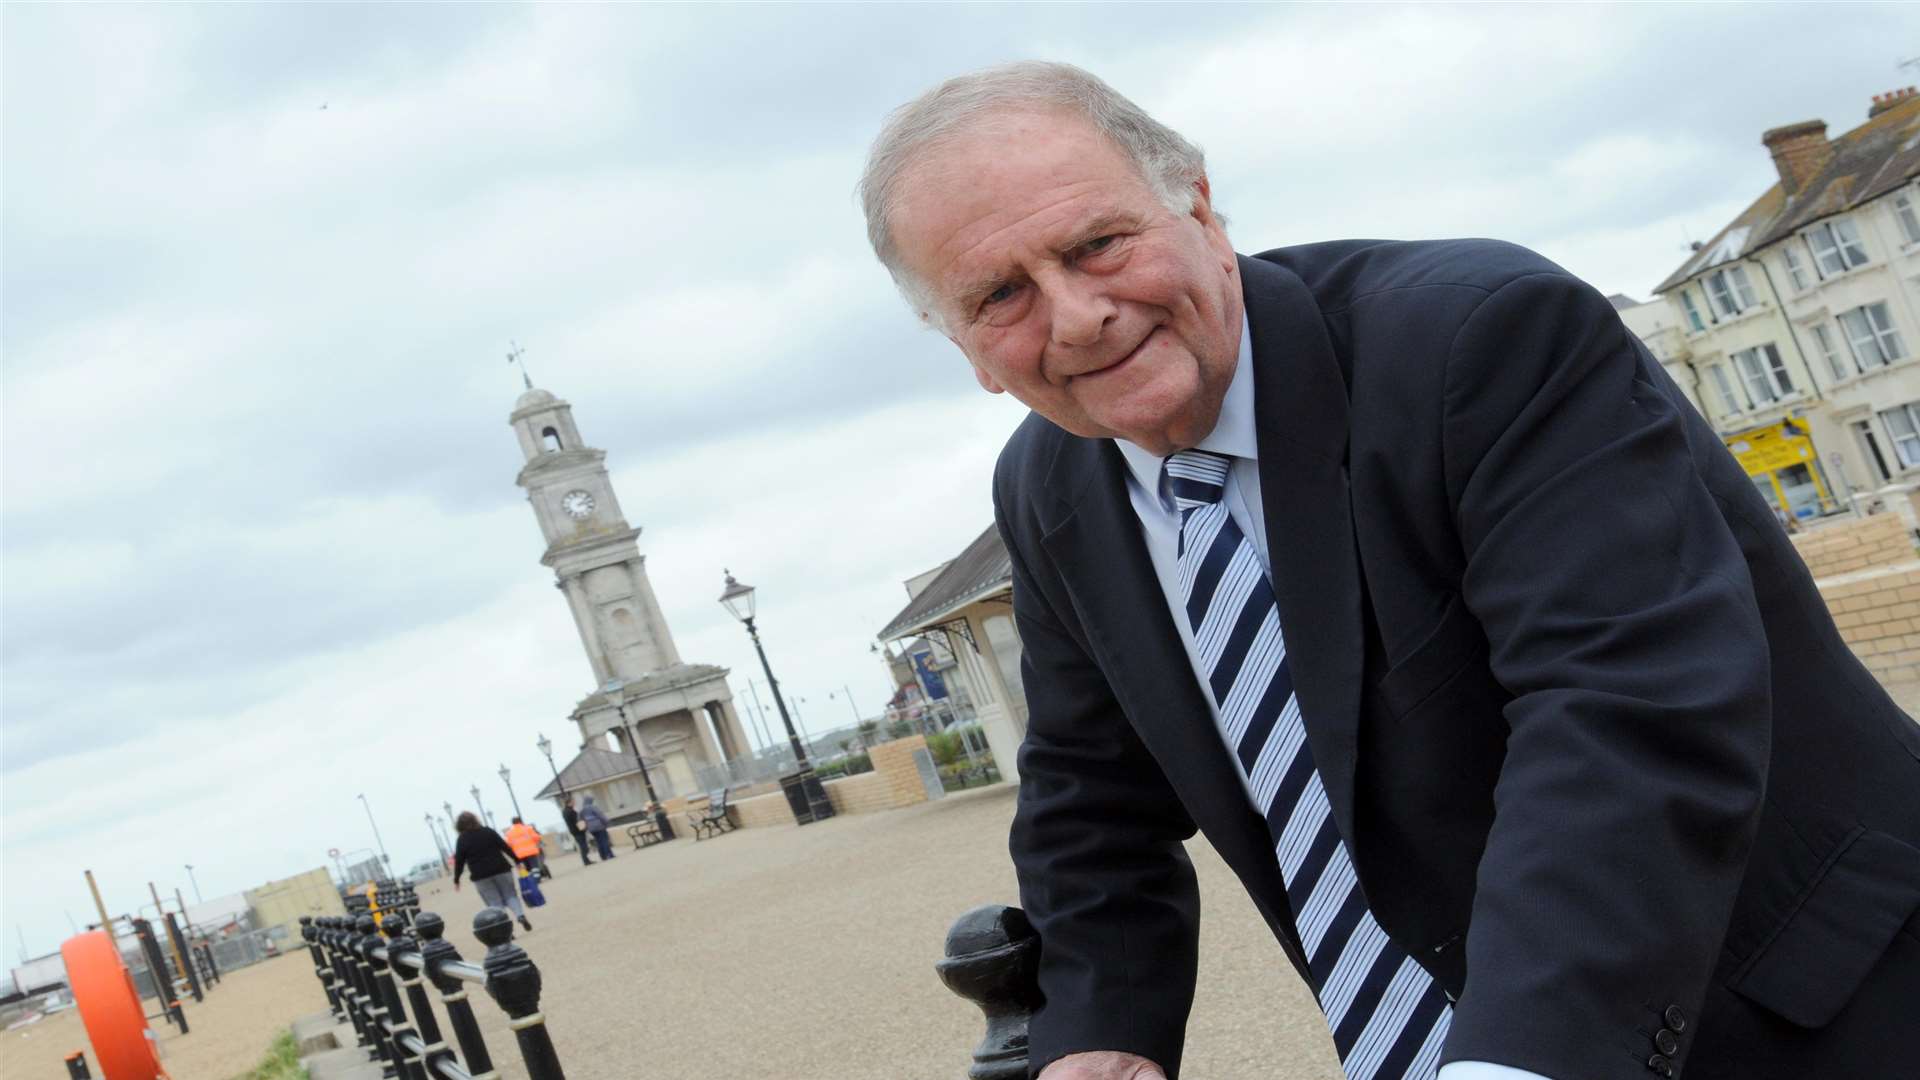 Parliamentary candidate for North Thanet Sir Roger Gale